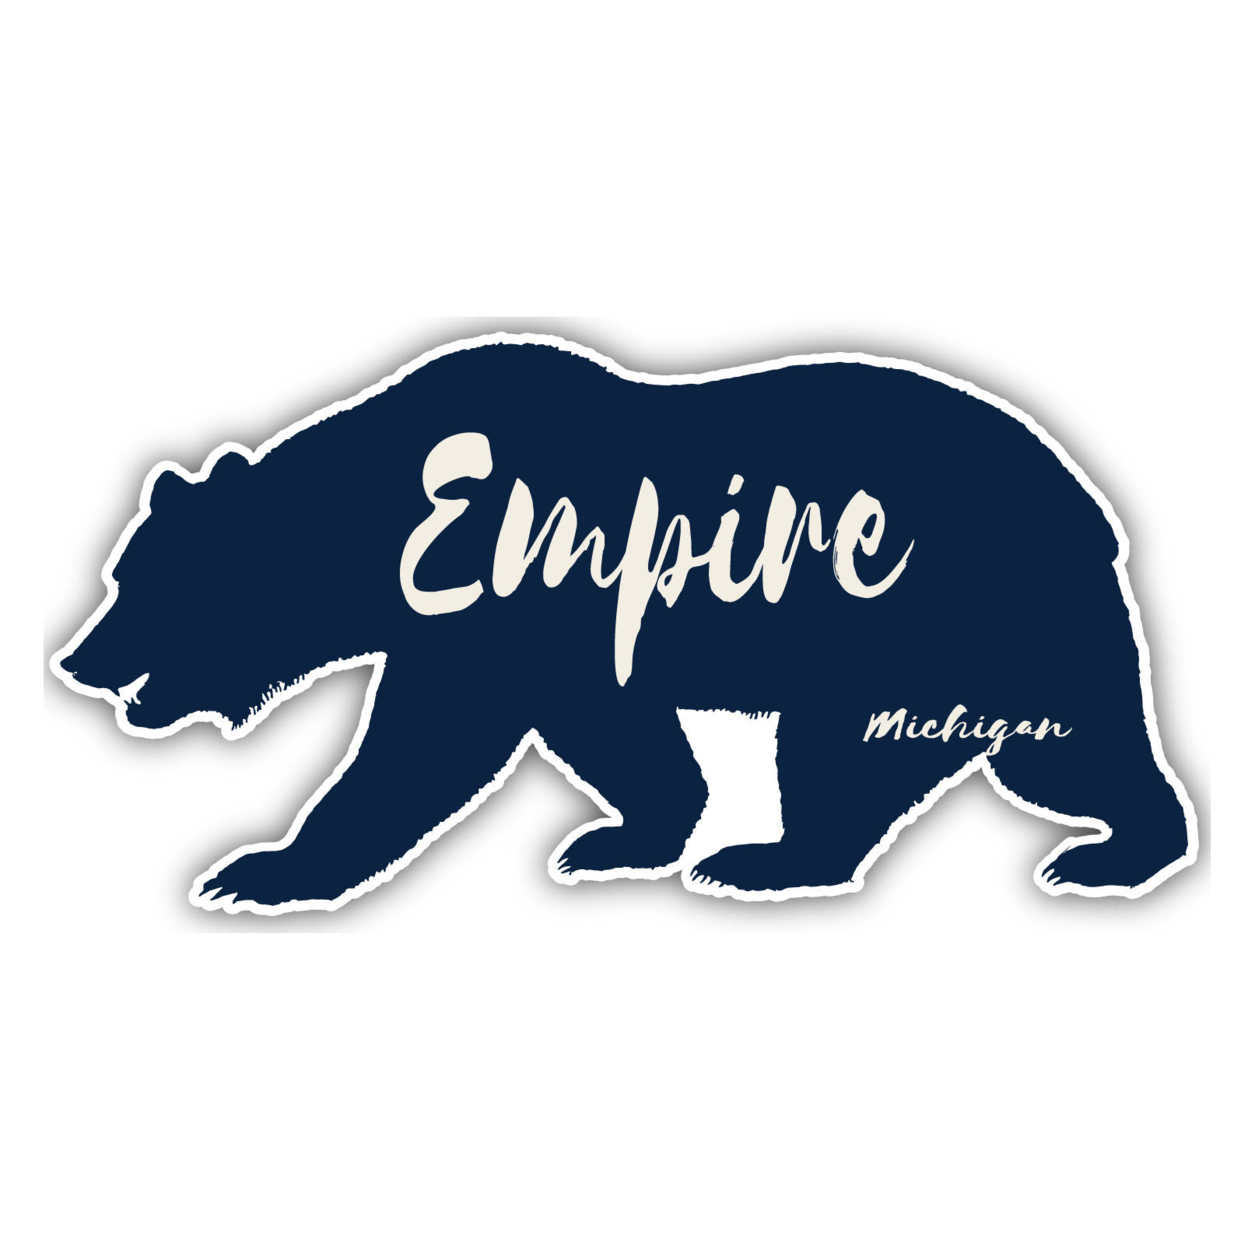 Empire Michigan Souvenir Decorative Stickers (Choose Theme And Size) - 4-Pack, 2-Inch, Bear